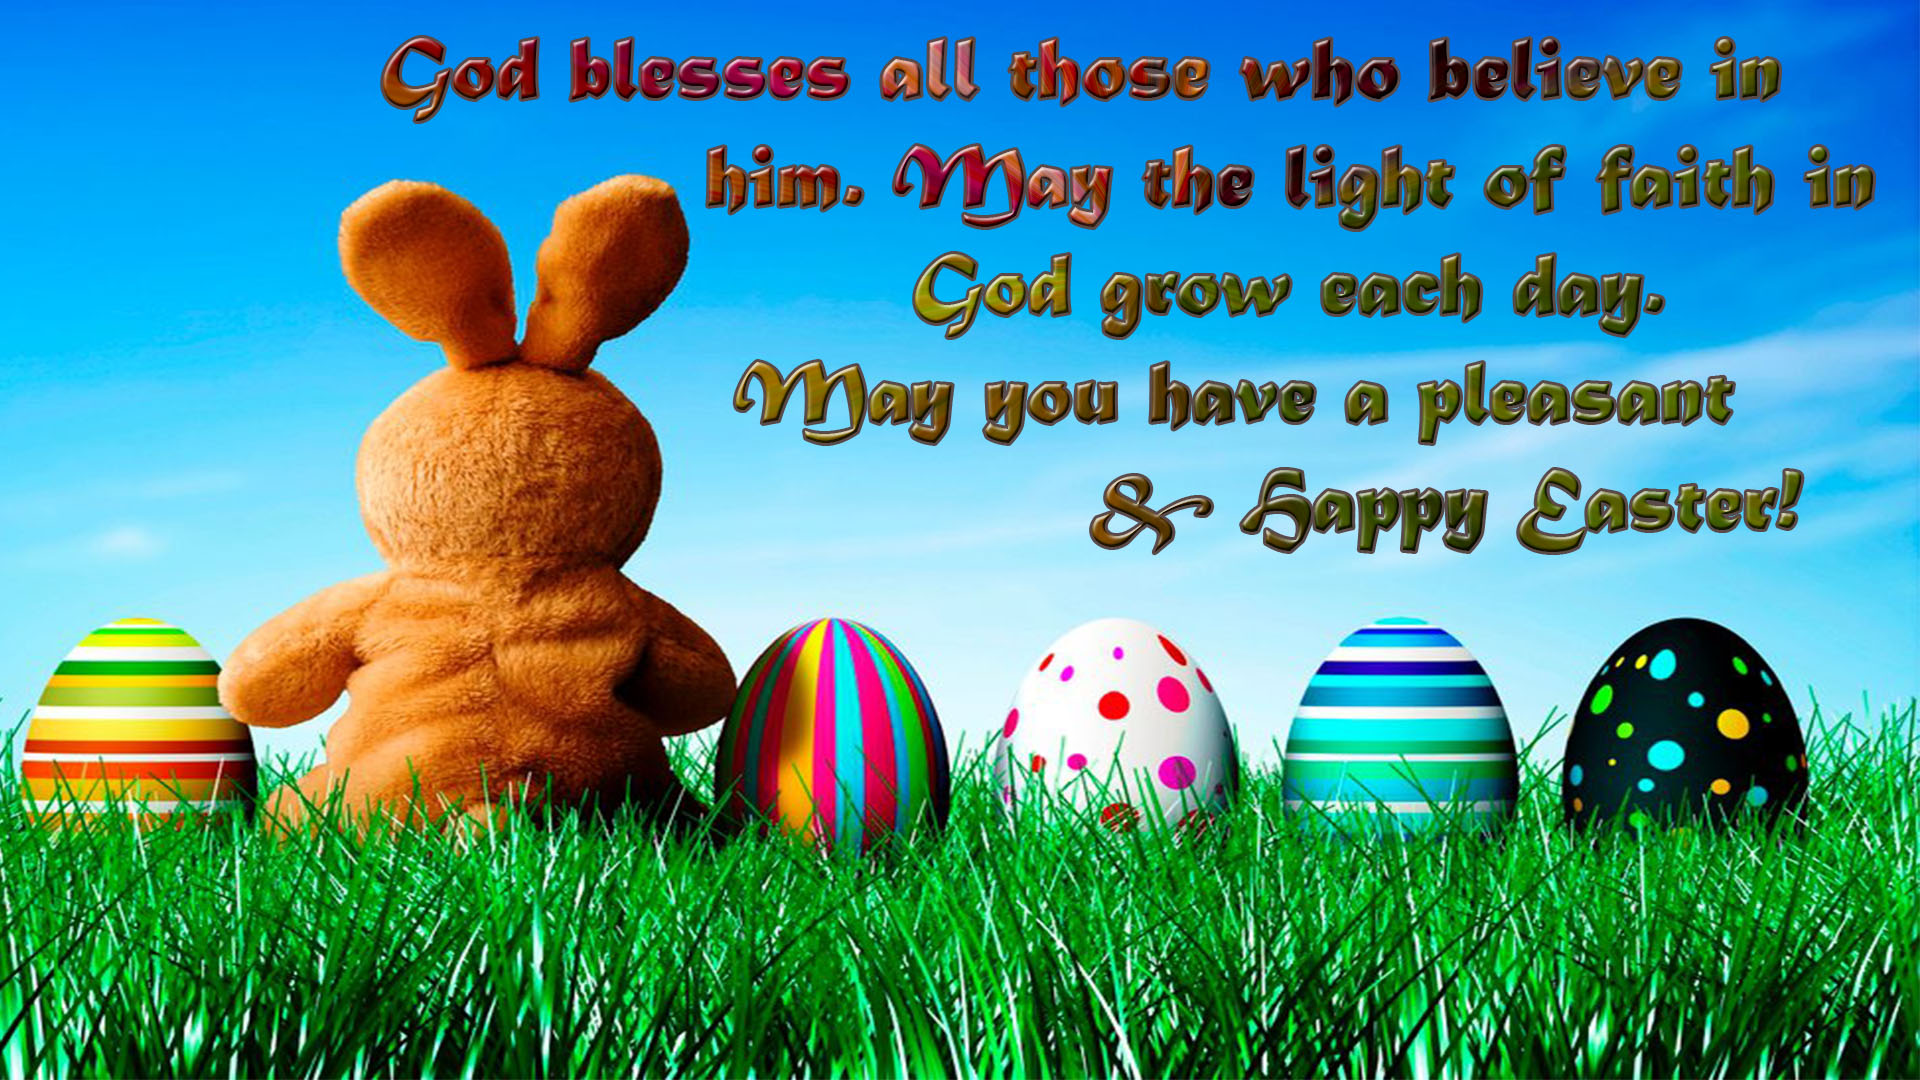 image for happy easter wishes